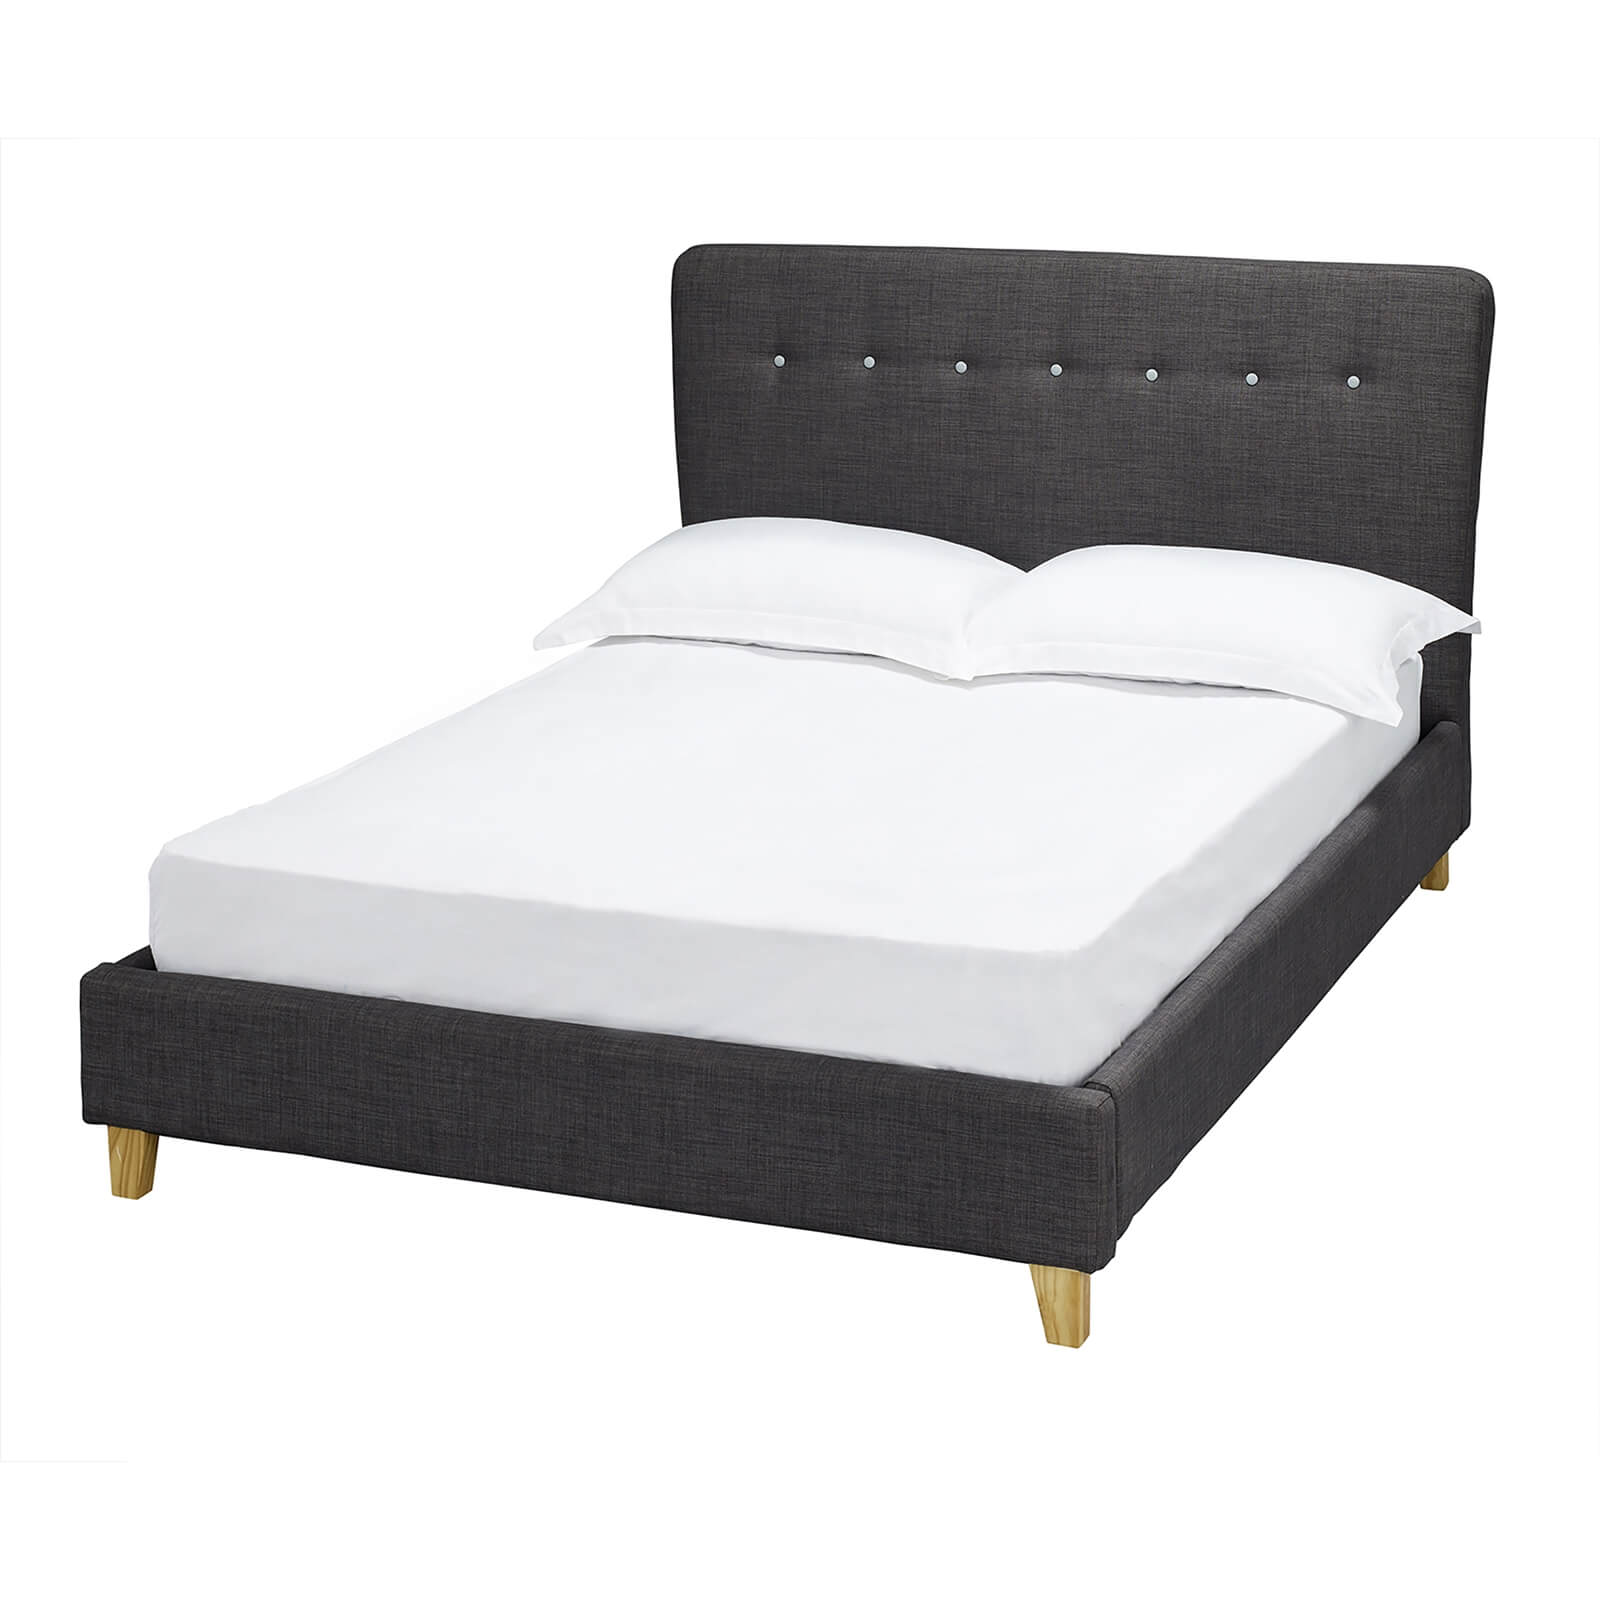 Portico Double Bed